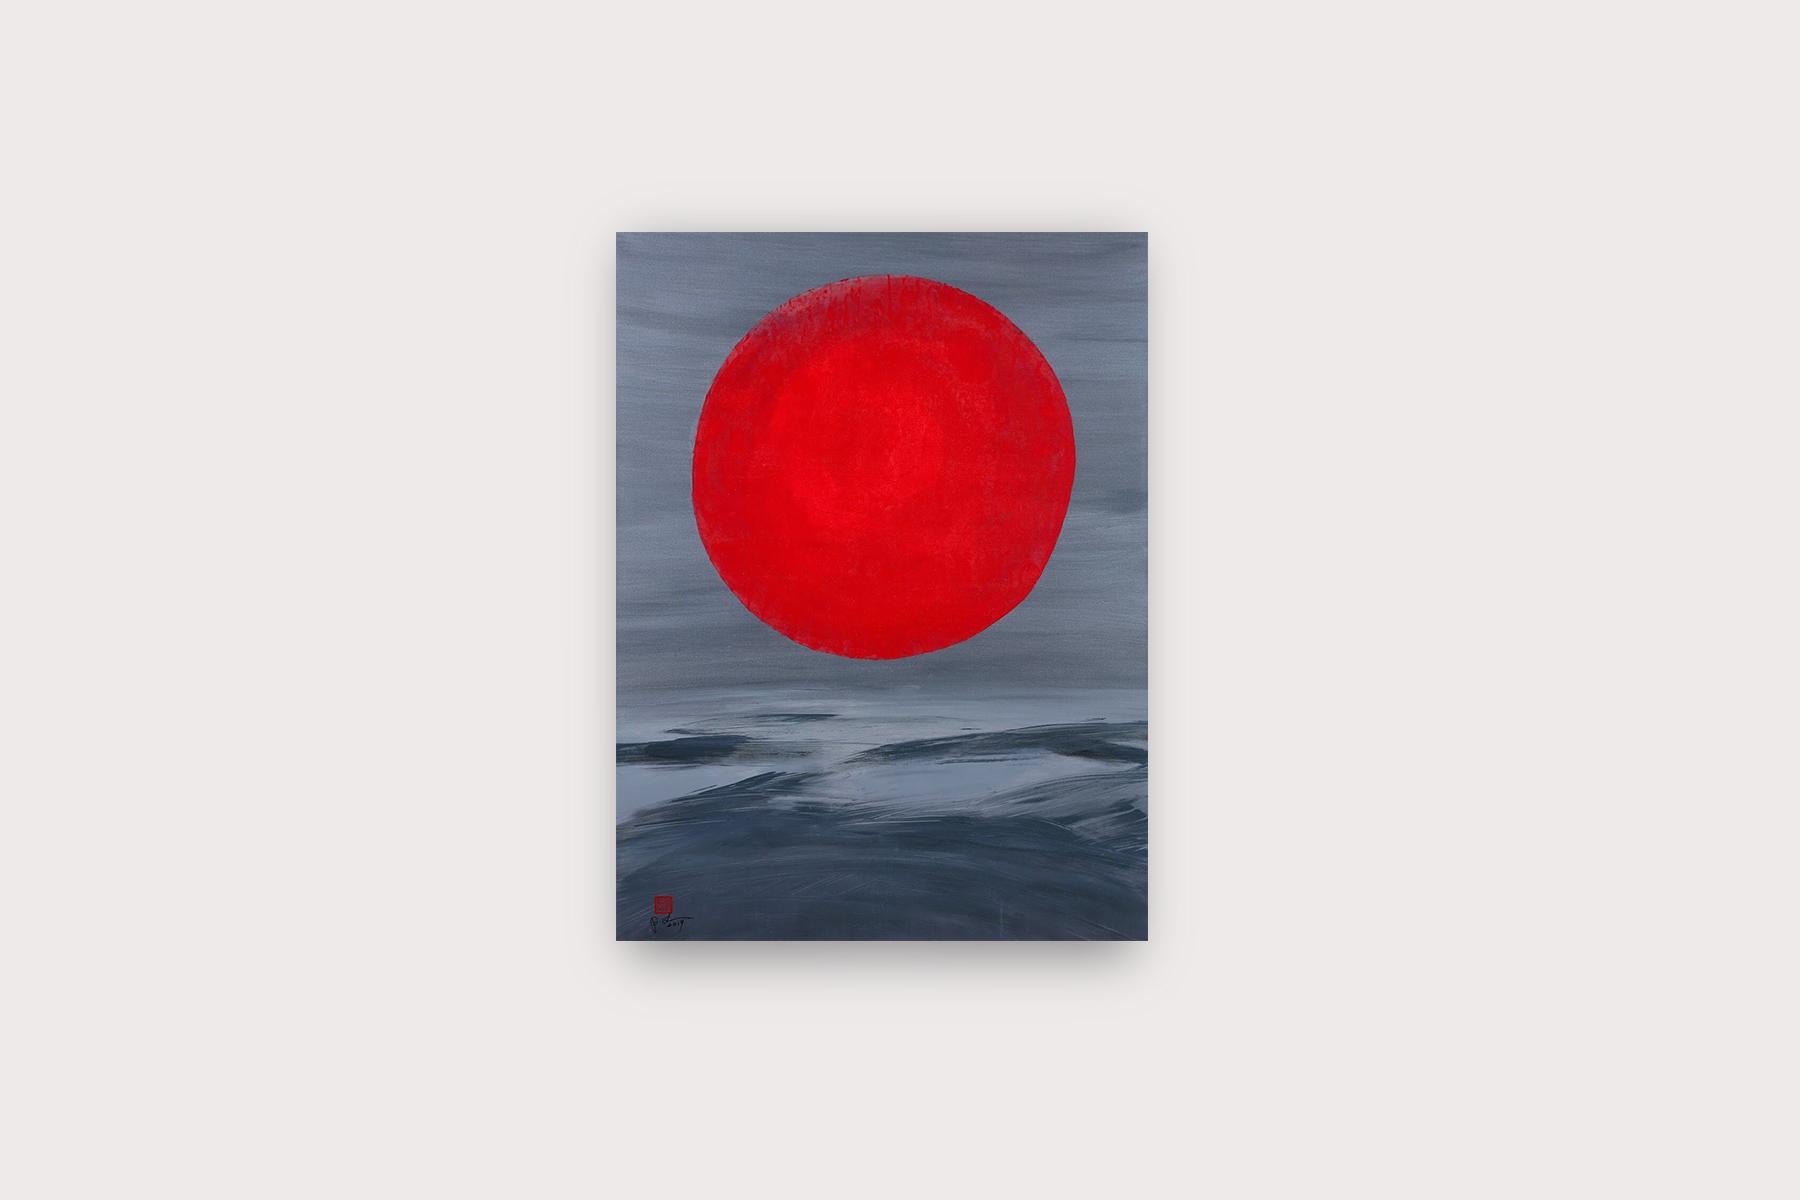 Mysterious Red Planet Rises In The Sky Expresses Taoism Less Is More Spirit  - Painting by Patrick Lee